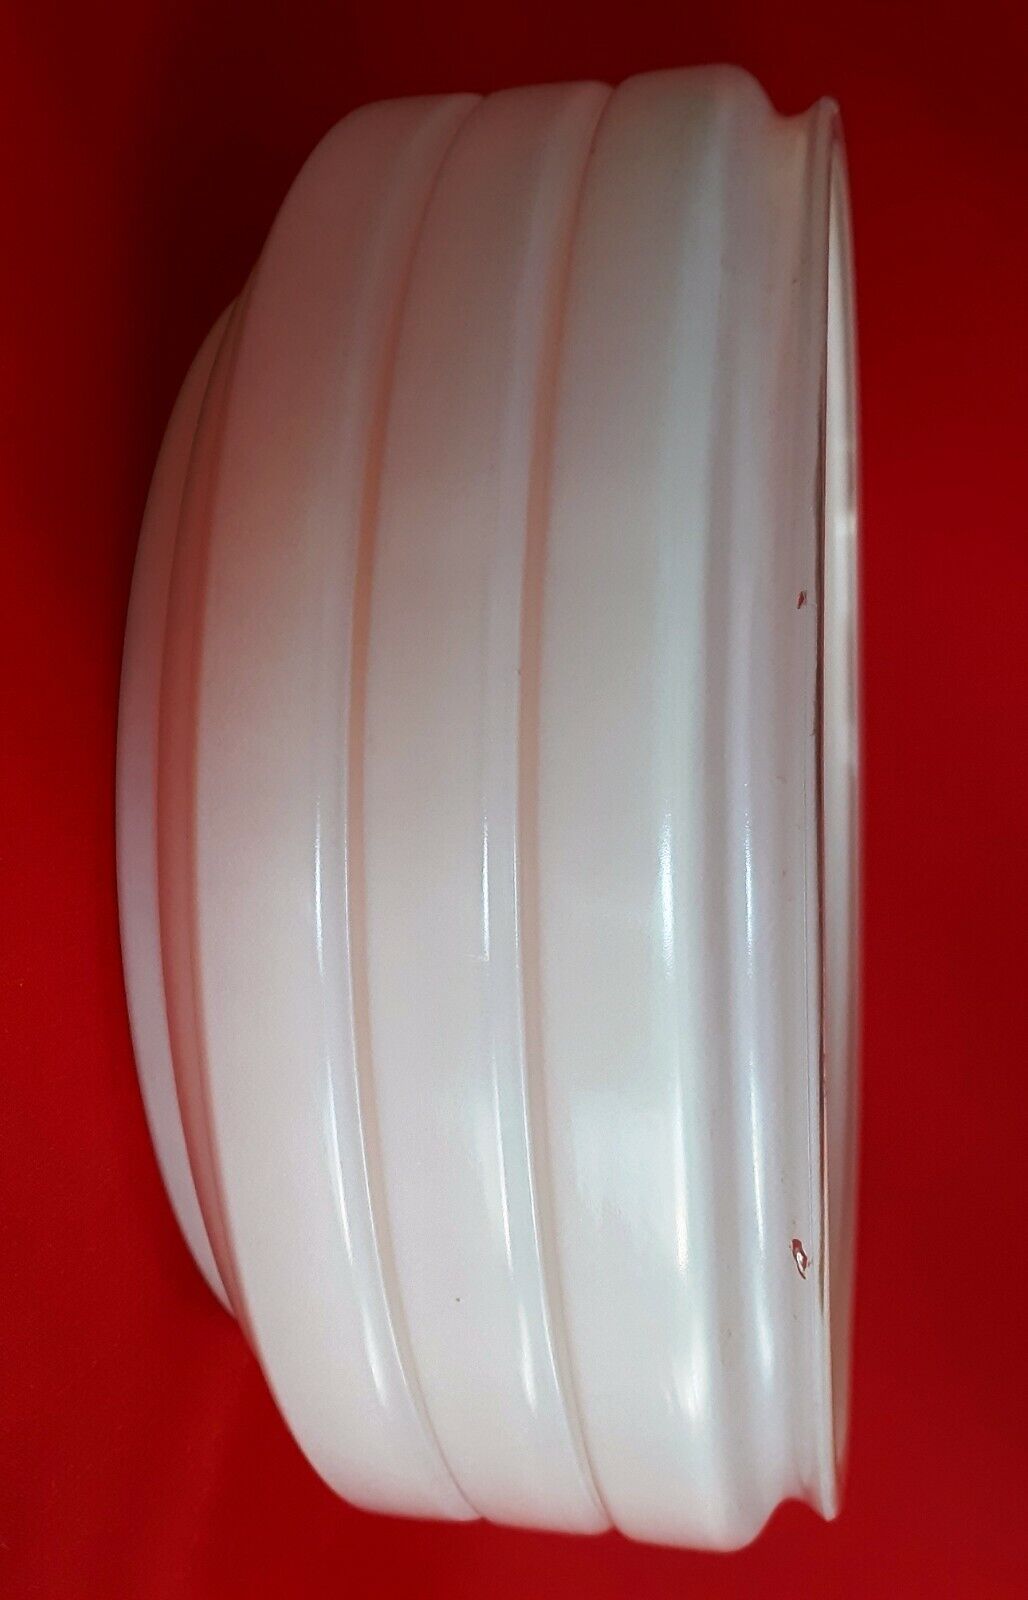 Vintage Off White Clear Thick Glass Drum Shape Large Light Shade Replacement Ceiling Wall Fixture Concentric Circles Round Cover 10" Fitter